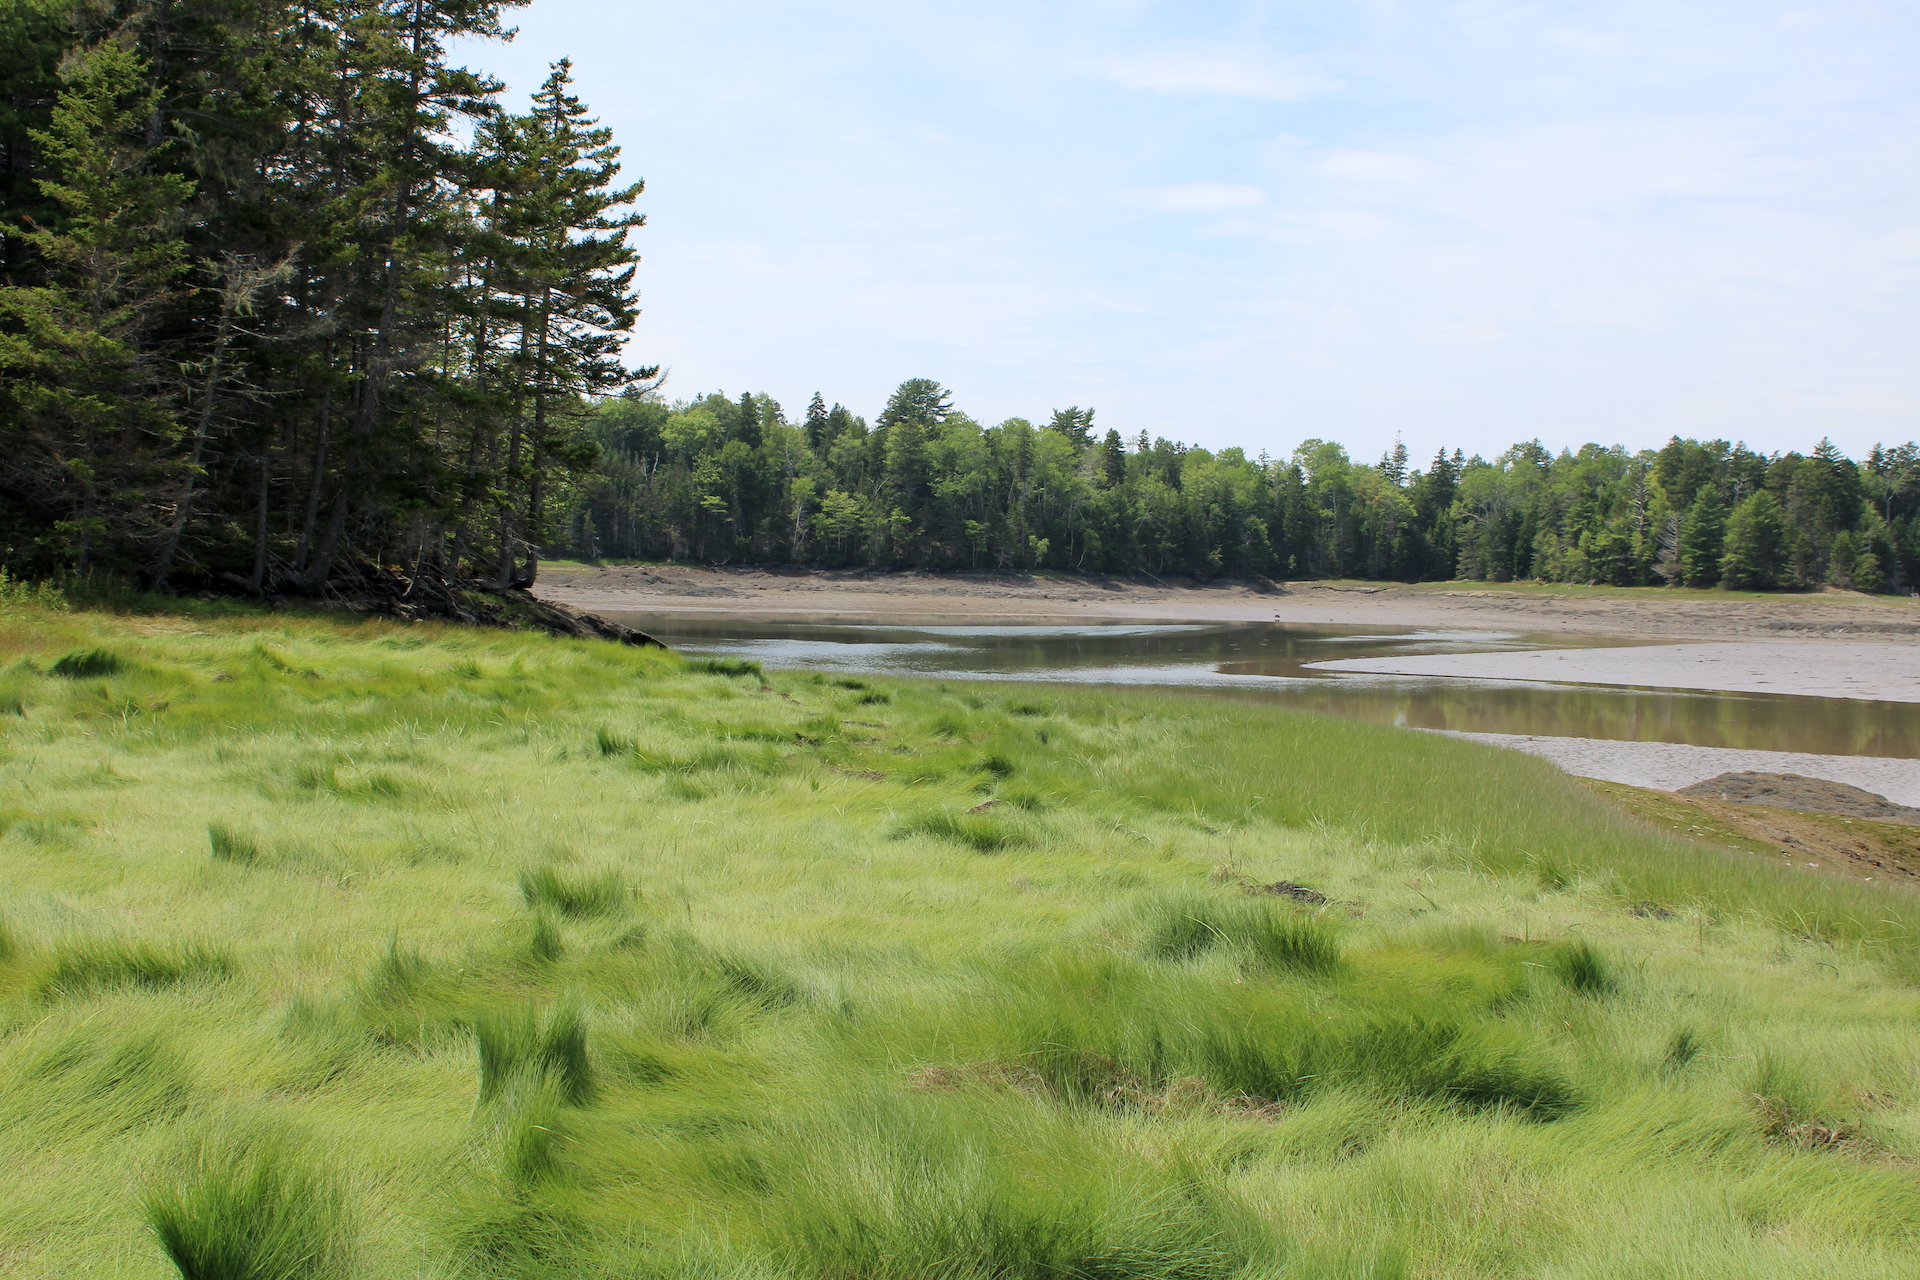 A grassy meadow in front of a mud flat. Trees form the horizon at center.